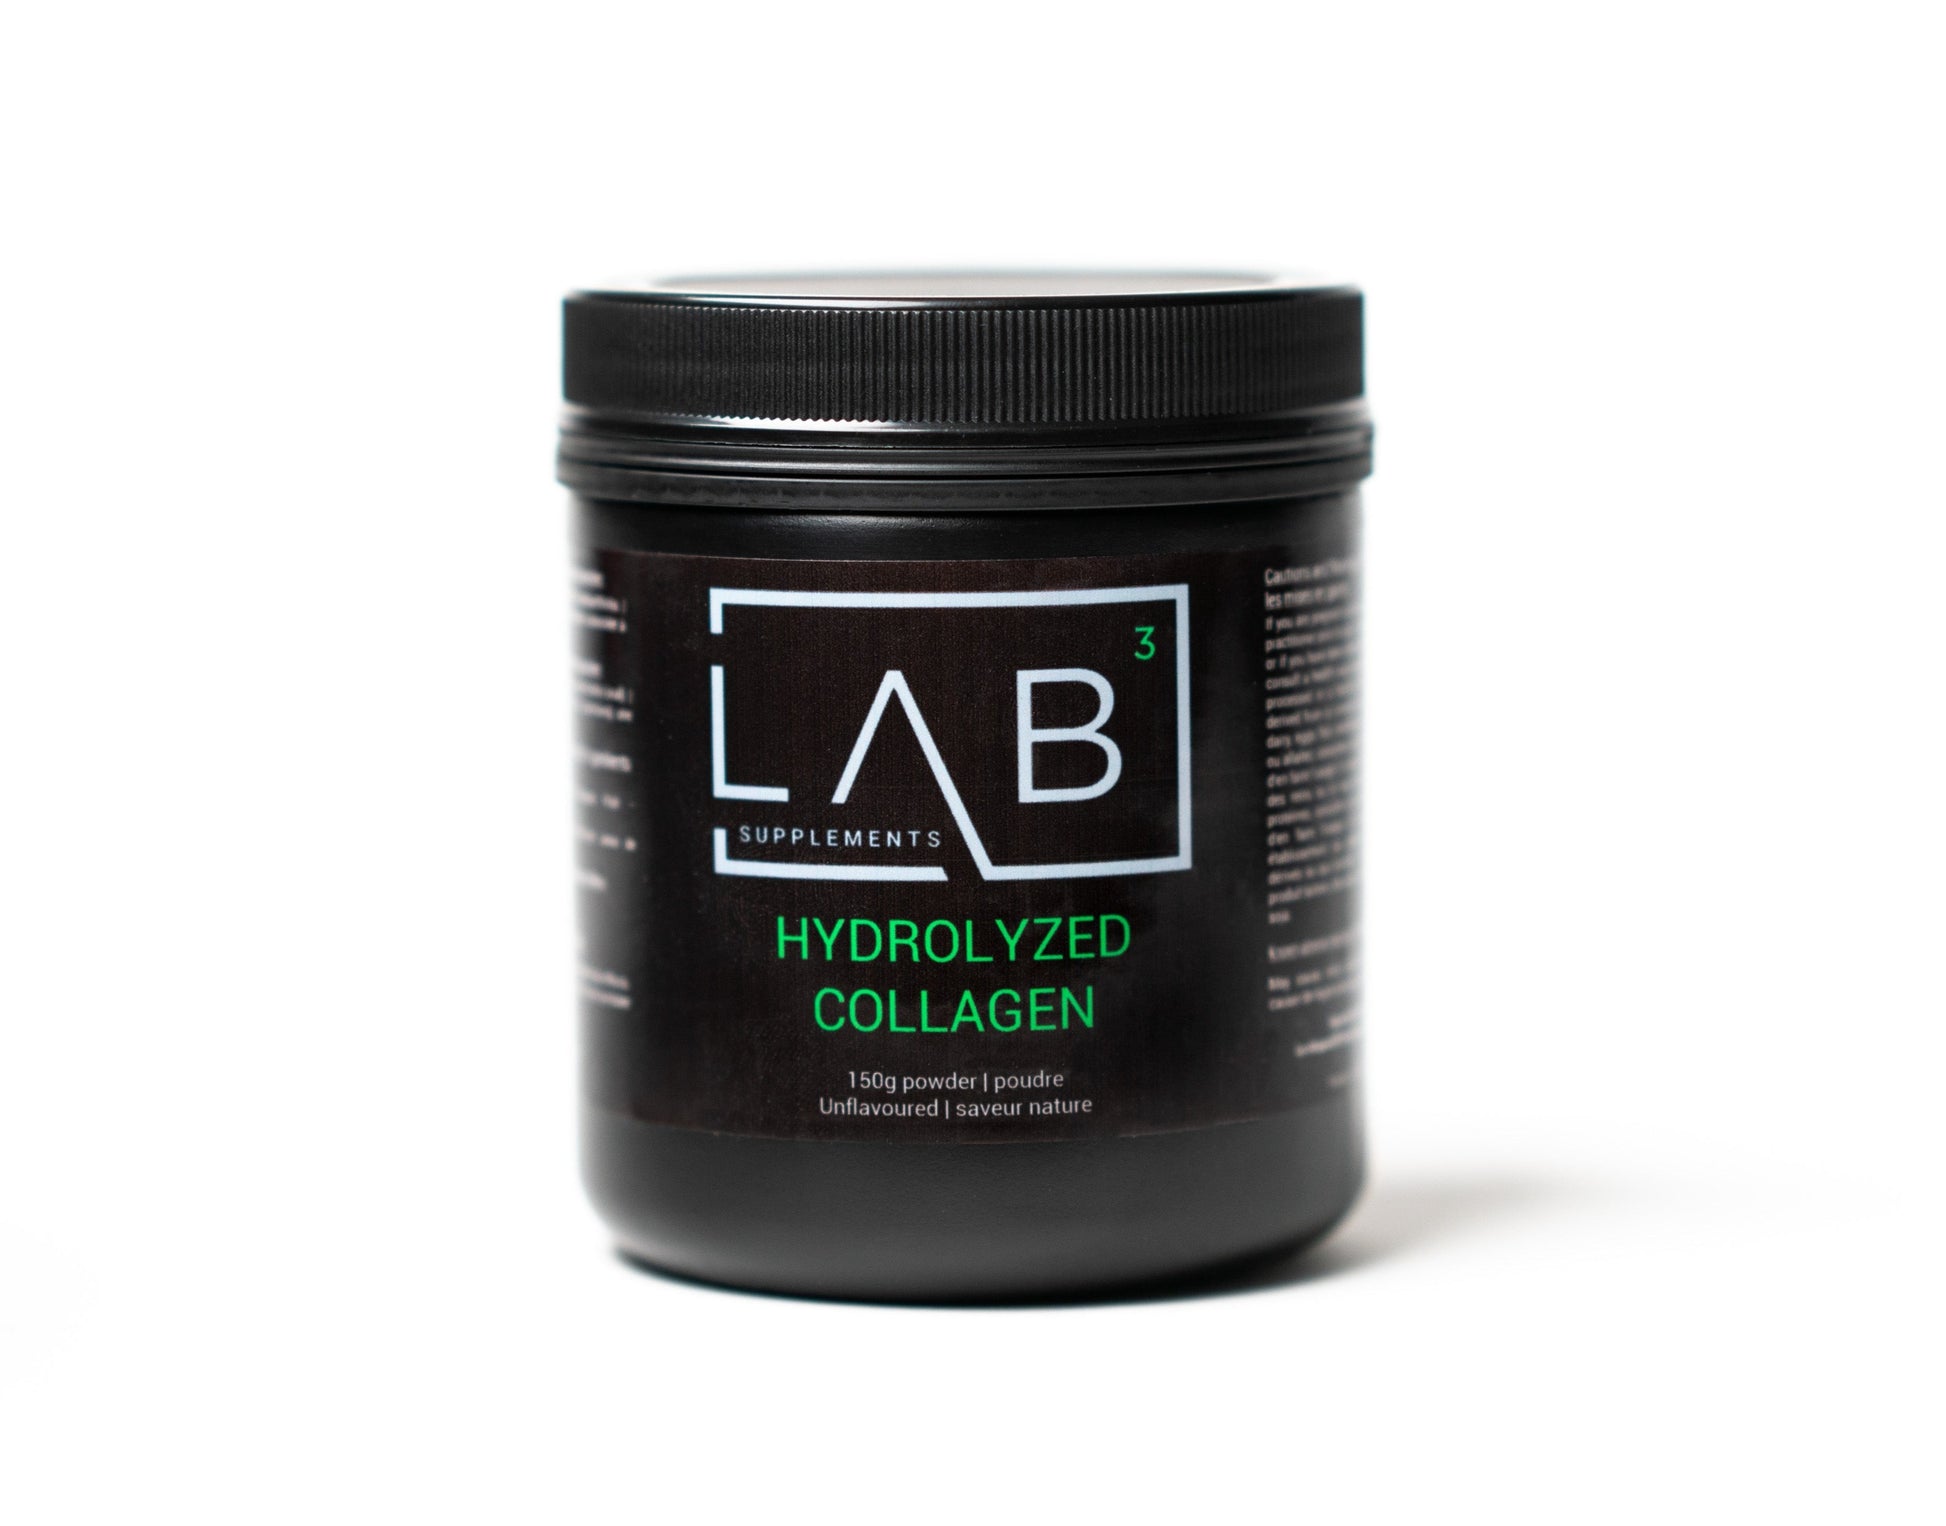 Image of LAB branded hydrolyzed collagen supplement in black screw-top container